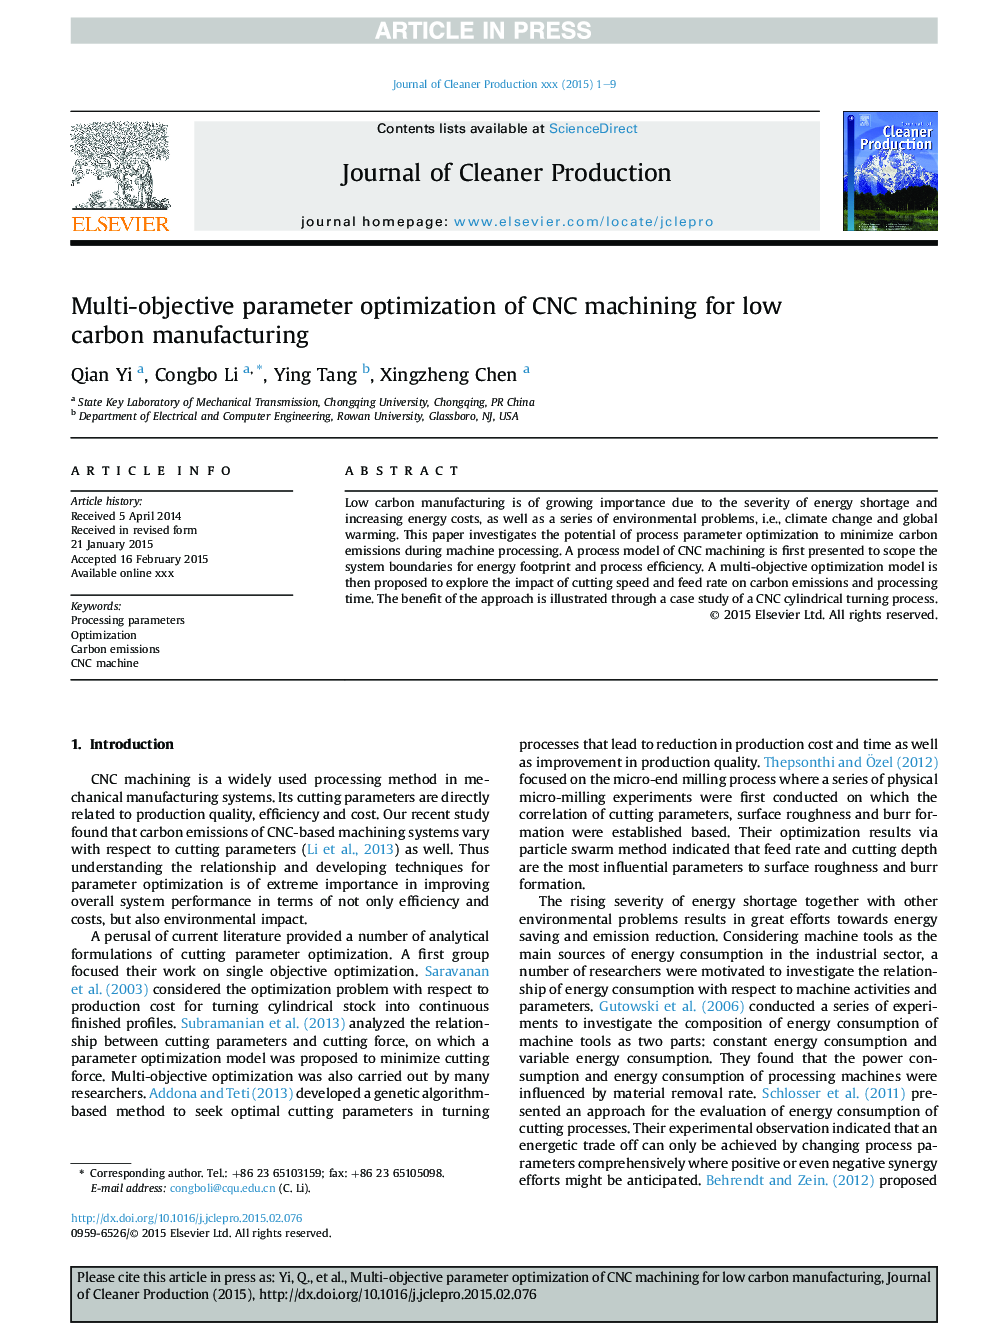 Multi-objective parameter optimization of CNC machining for low carbon manufacturing